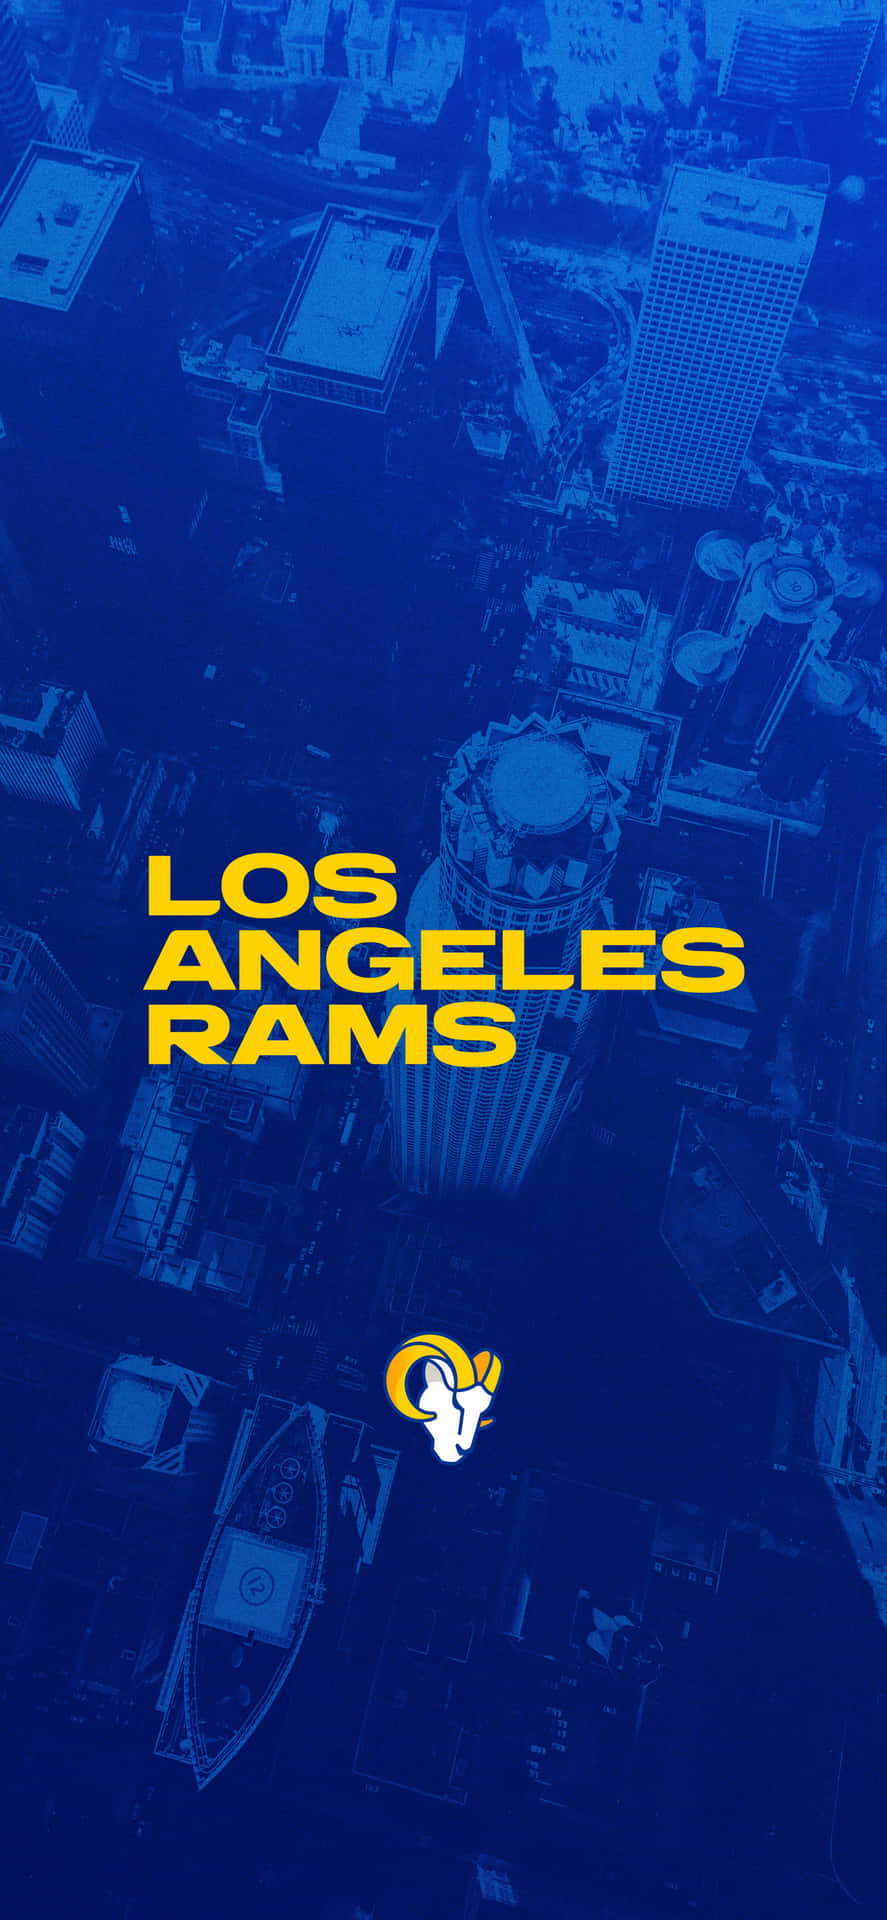 A Blue And Yellow Background With The Words Los Angeles Rams Wallpaper